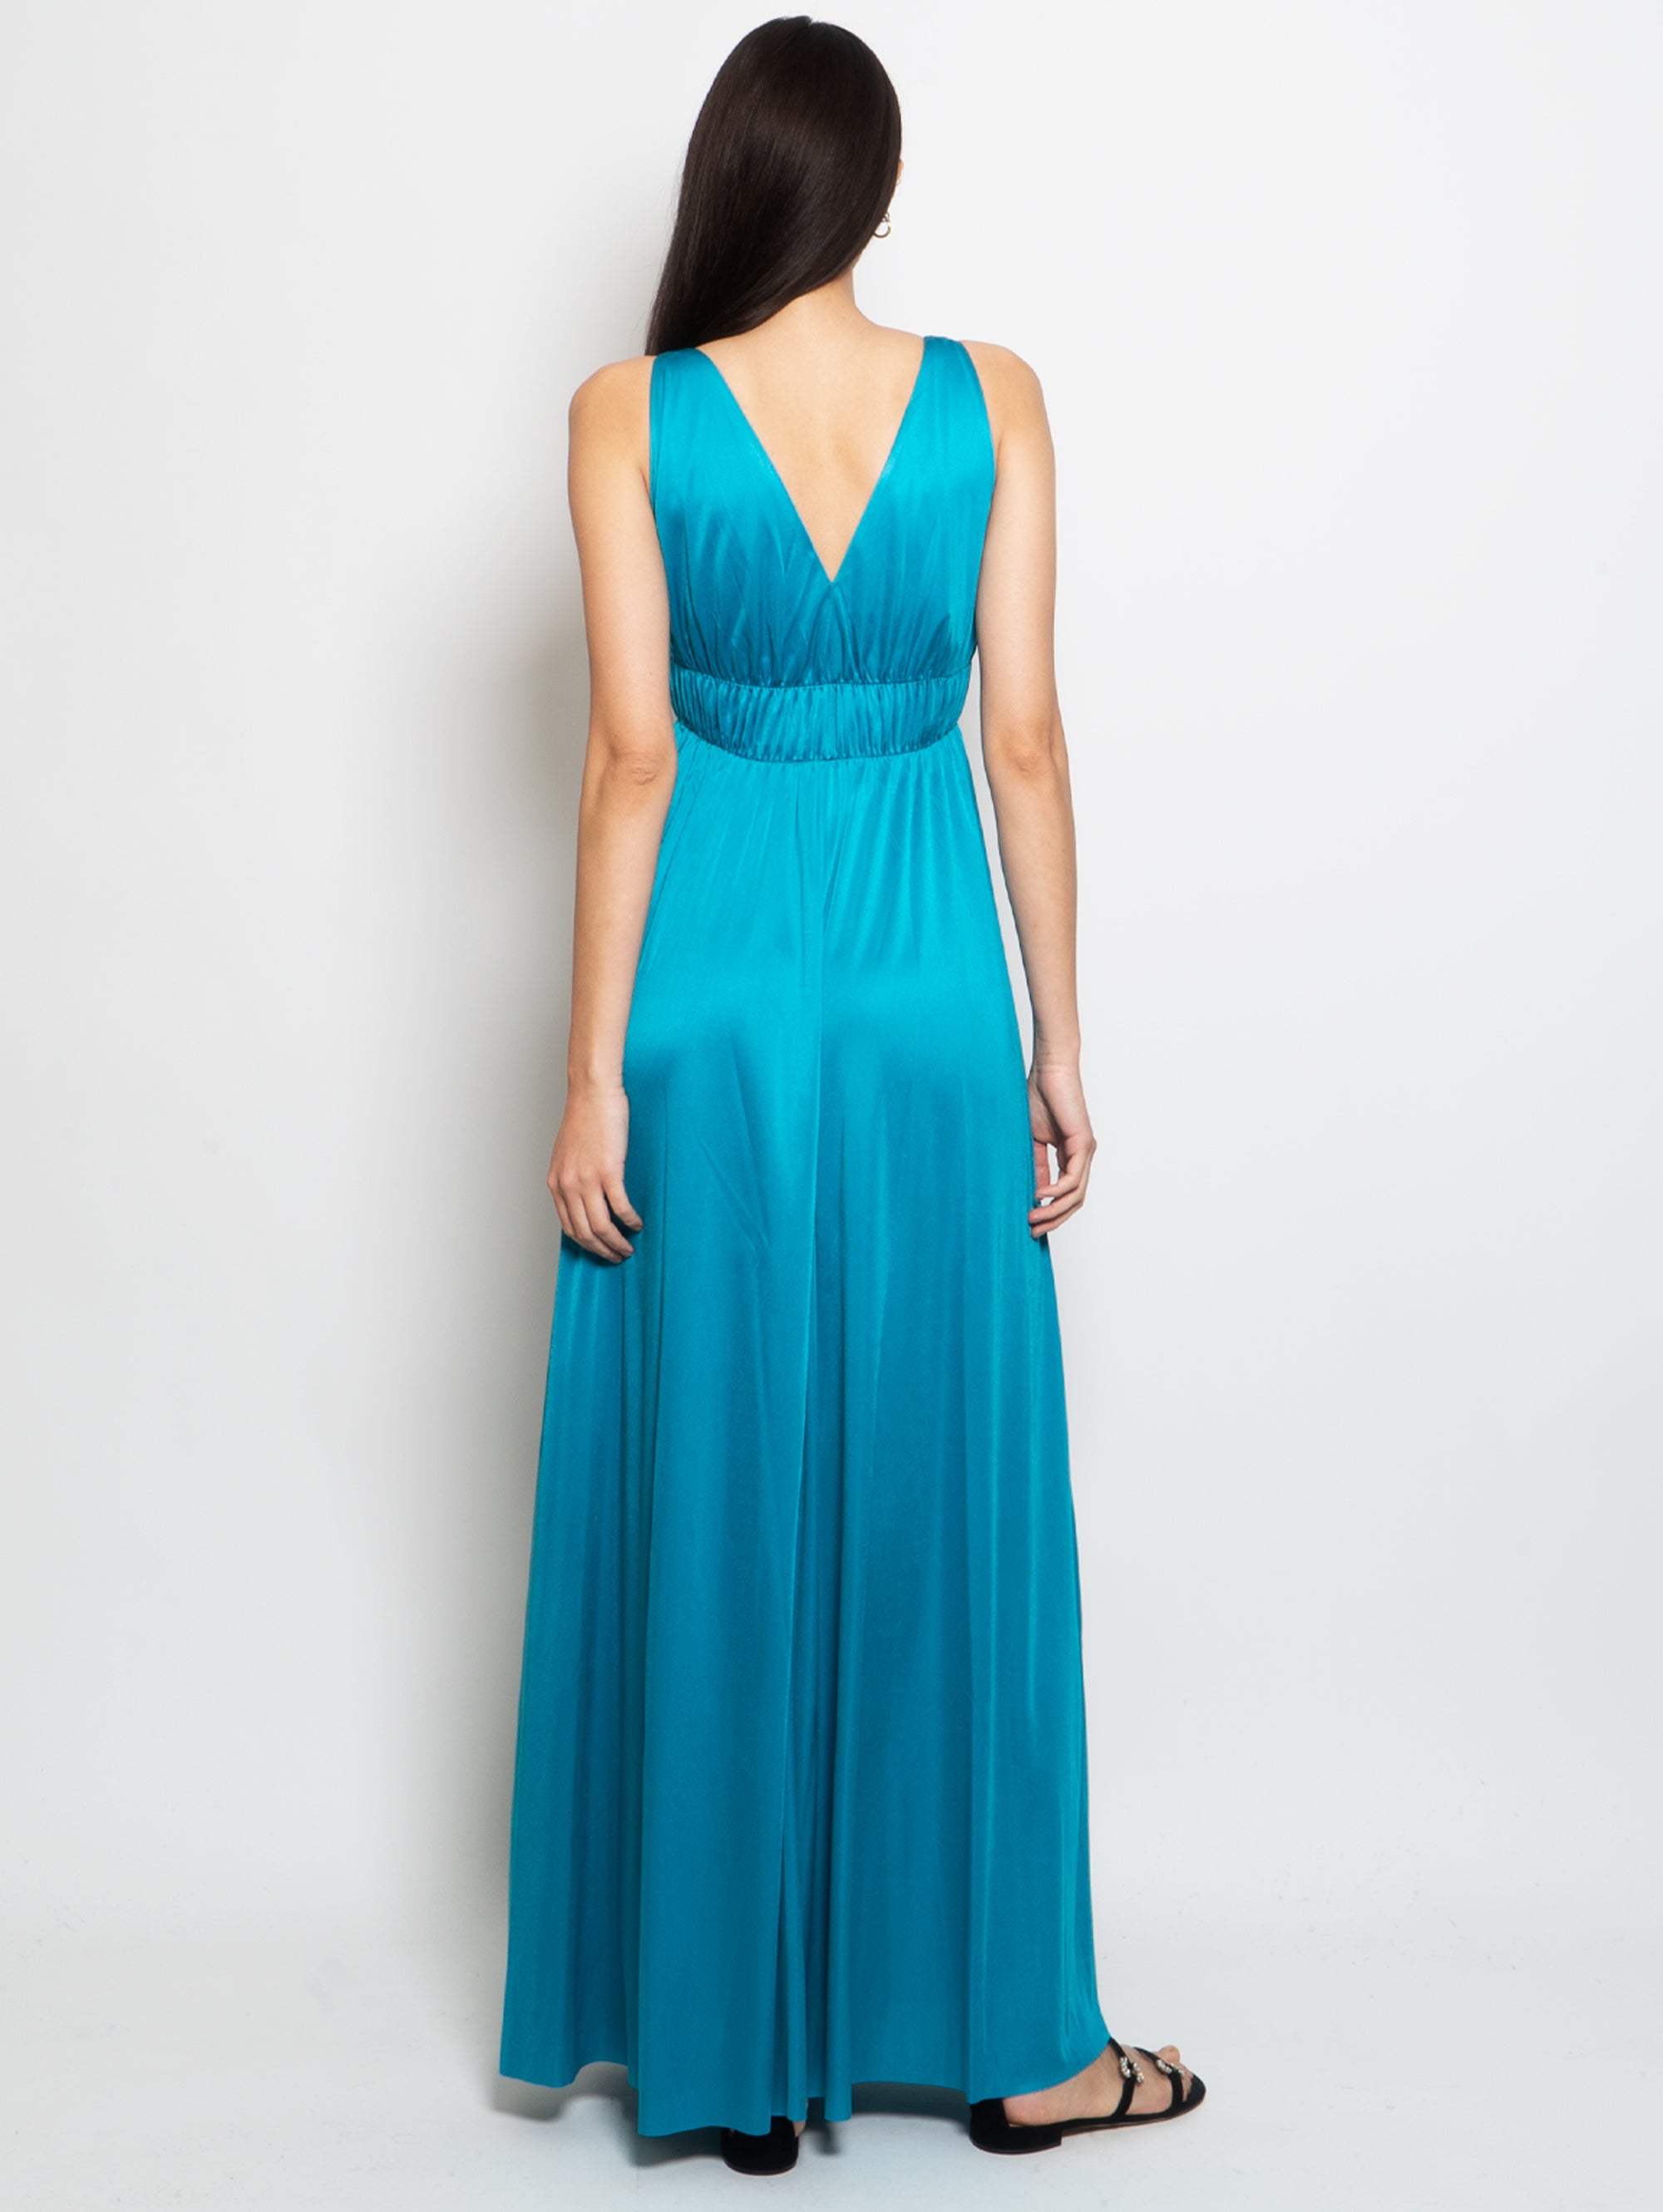 Turquoise Empire Style Long Dress